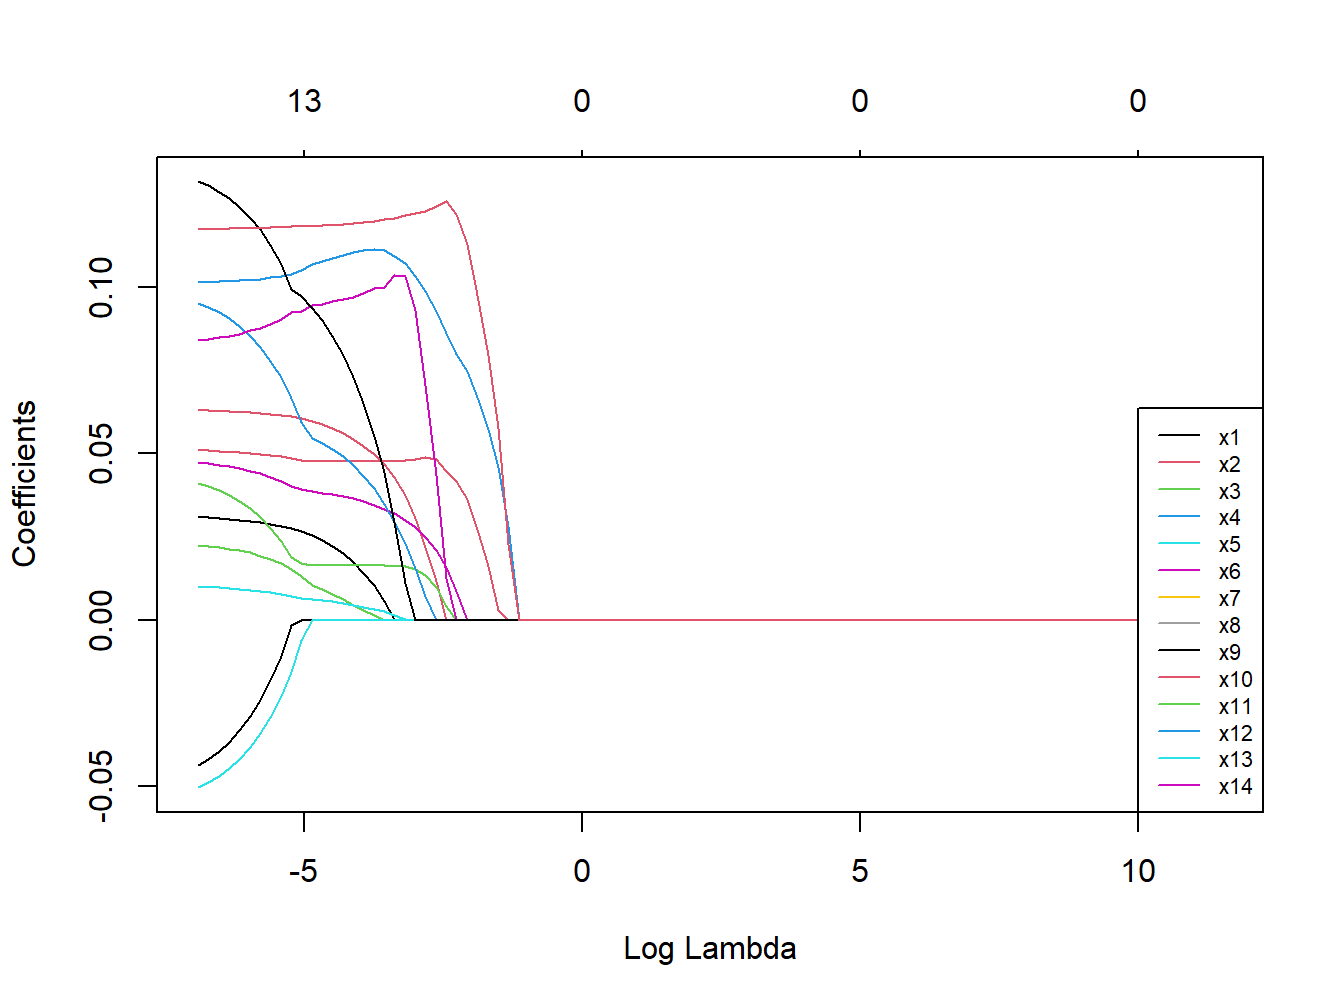 Coefficients trajectories for lasso regression in the simulated dataset